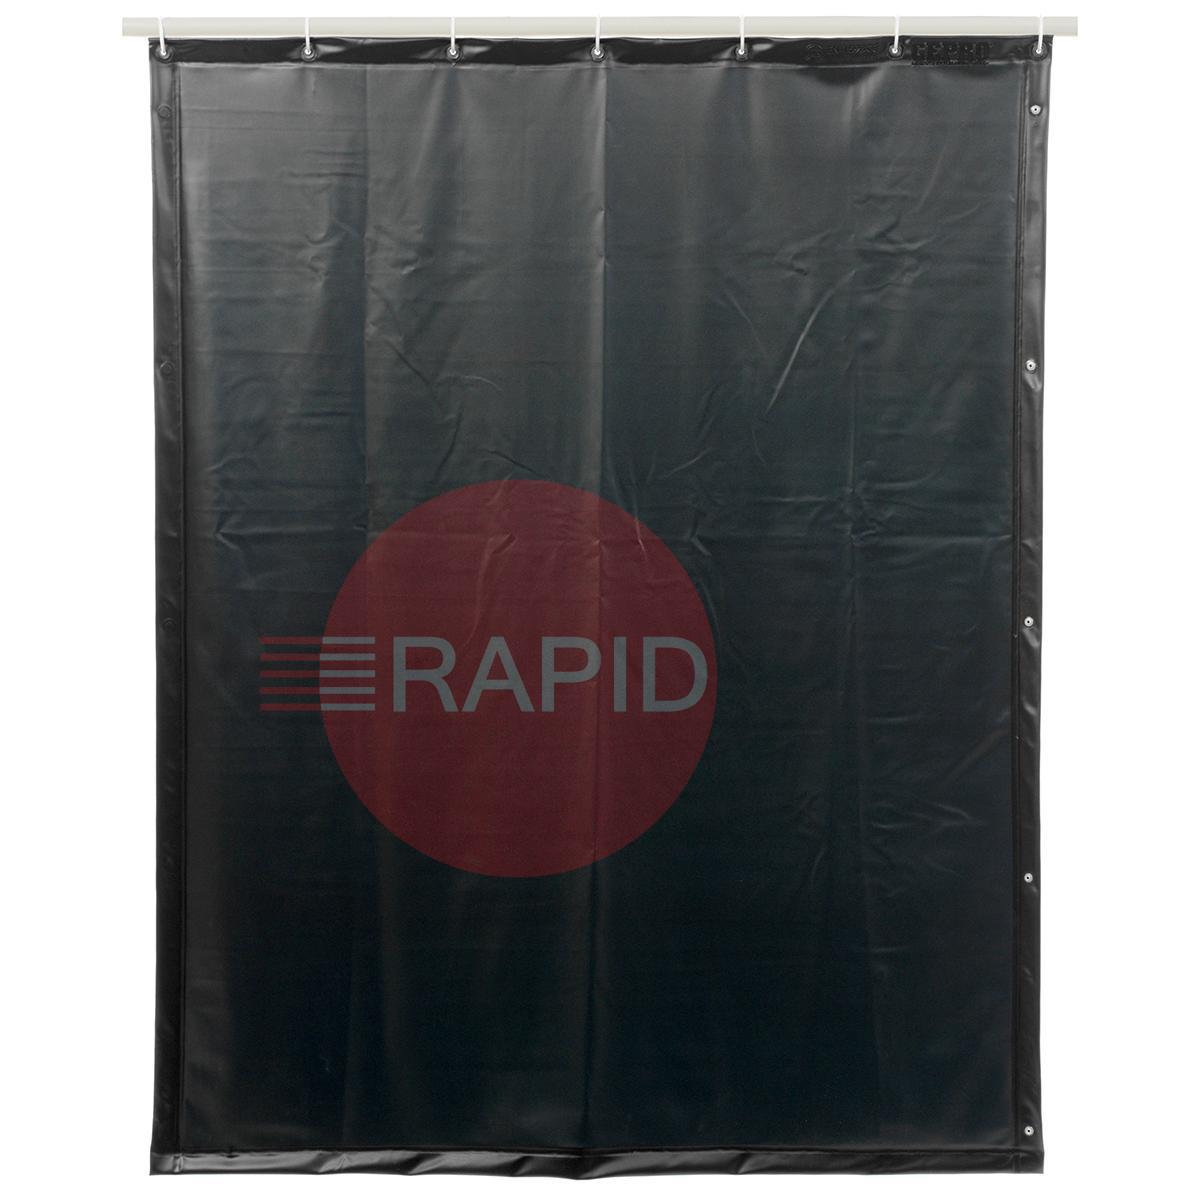 14.19.04  Cepro Green-9 Welding Curtain with Eyelets All Around - 180cm x 120cm, EN 25980